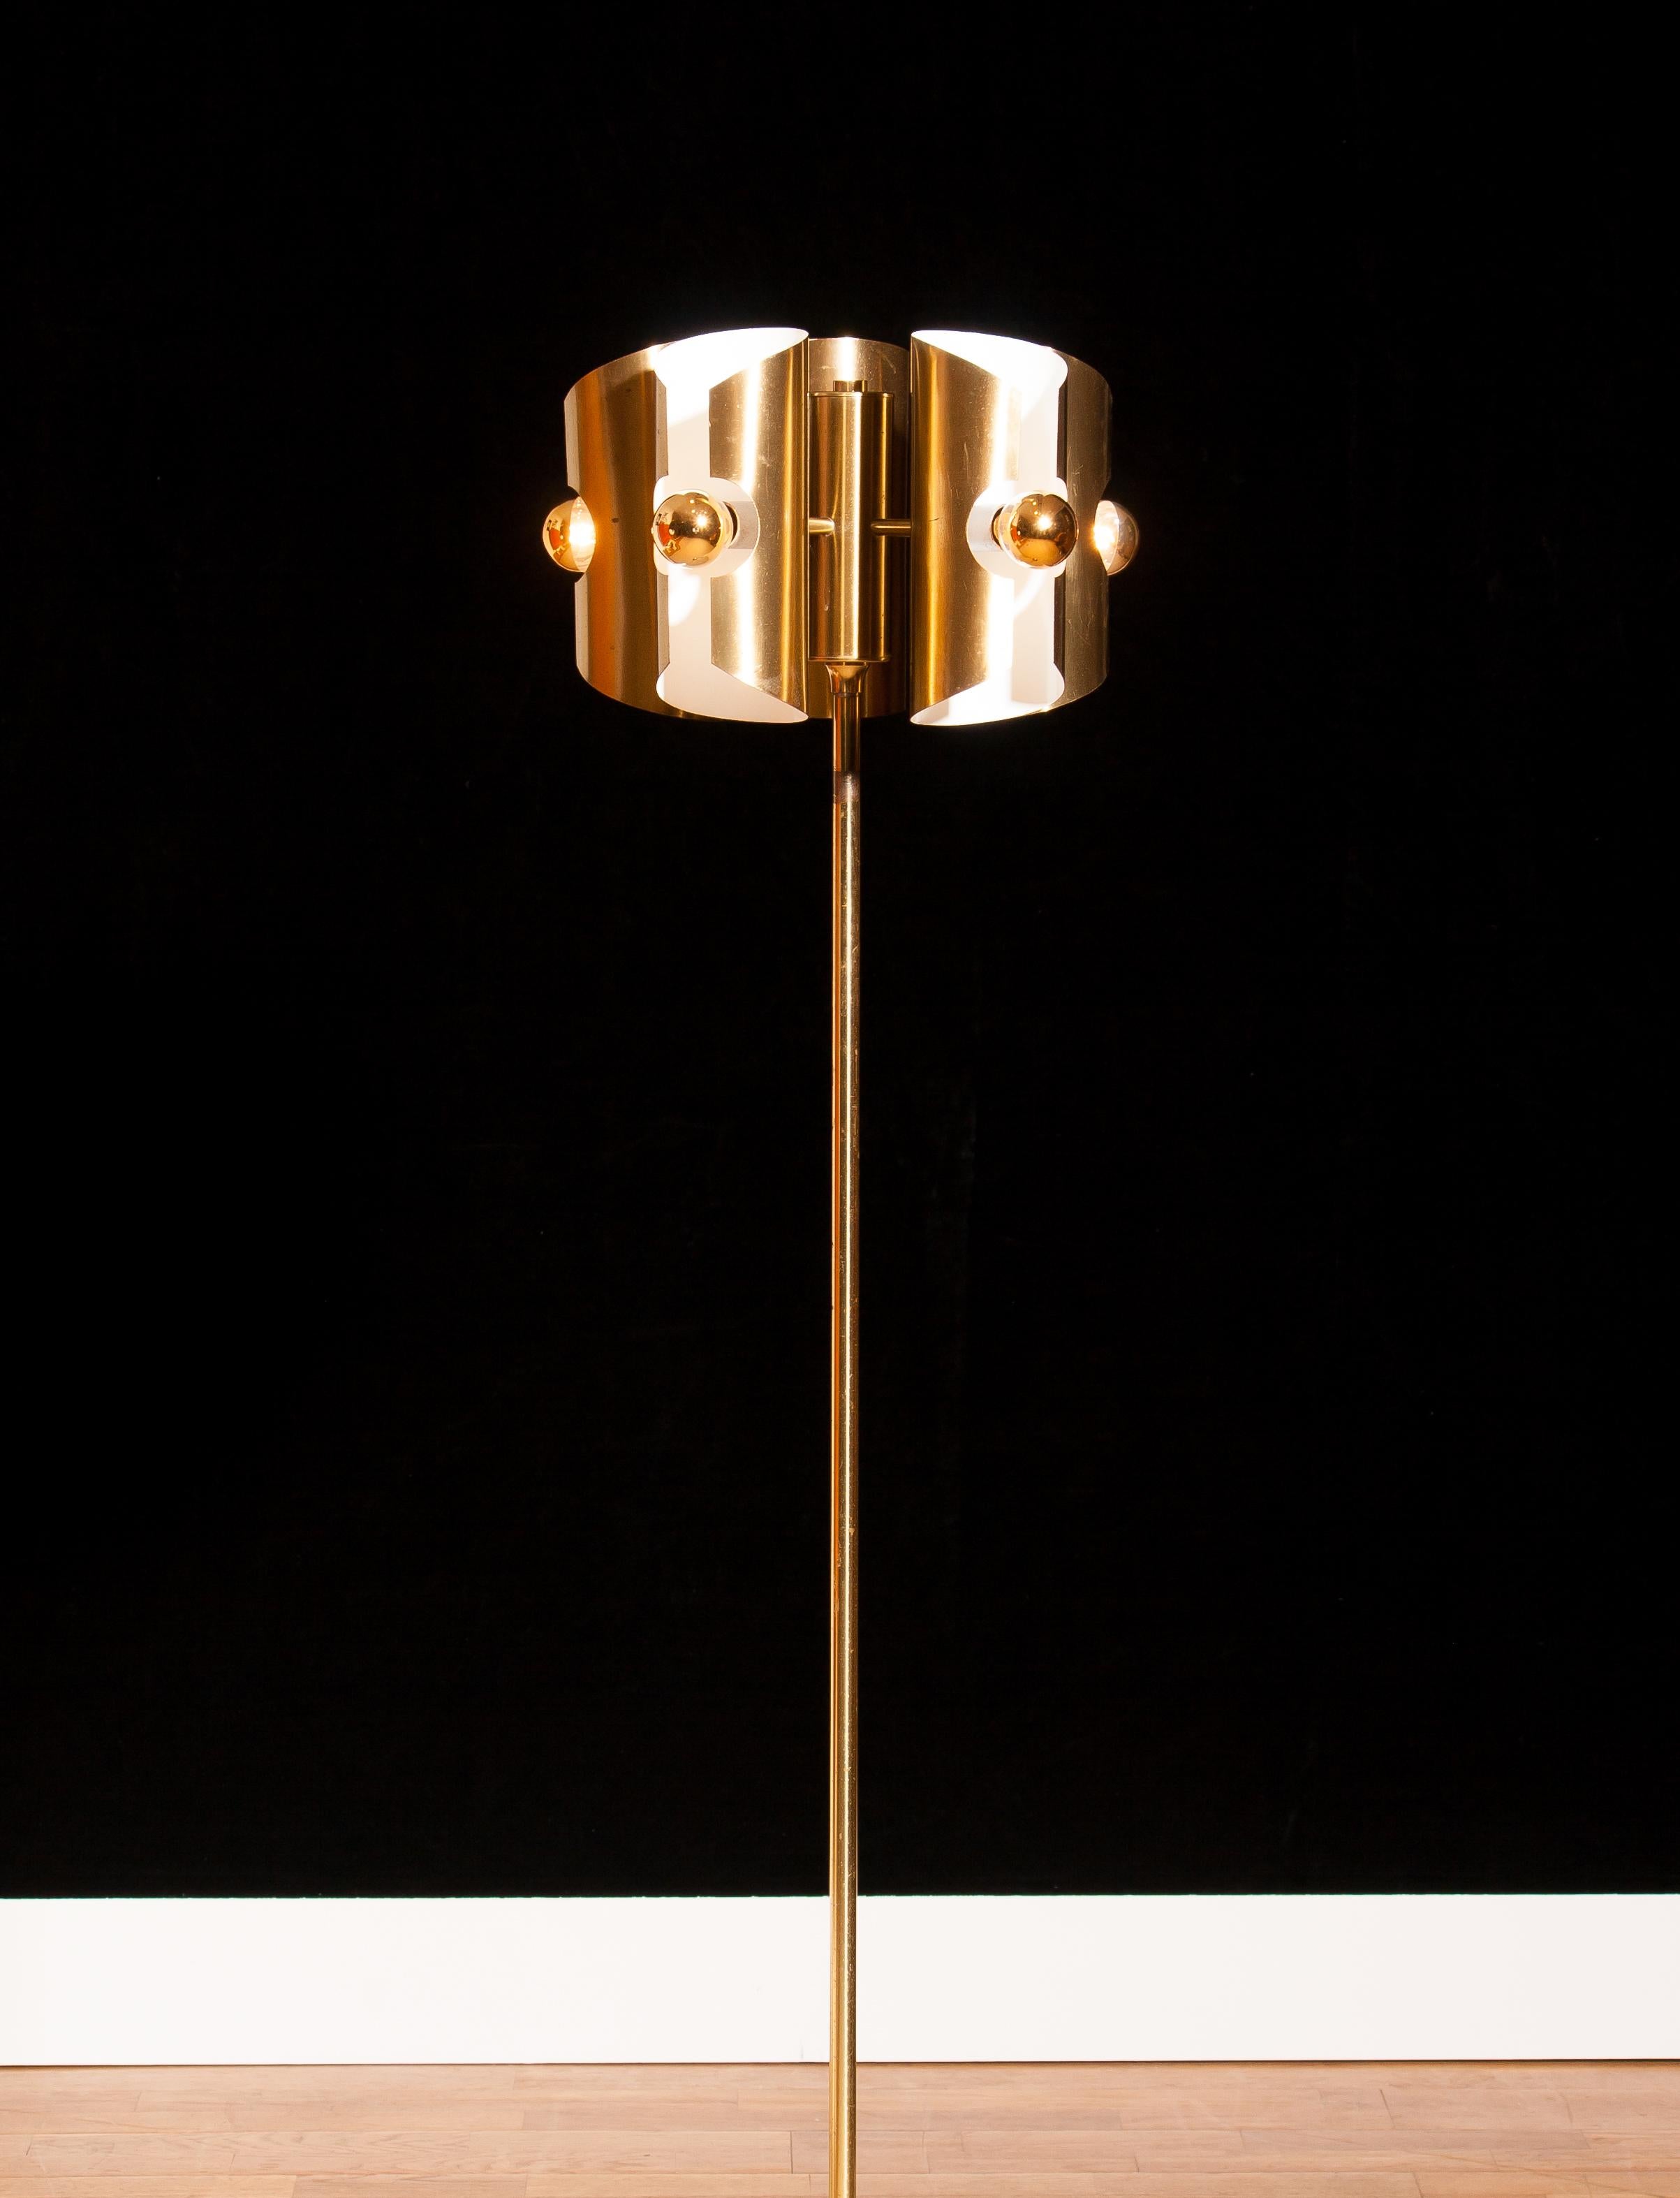 Metal 1960 Lovely Italian Brass Floor Lamp with Five Brushed Brass Shades